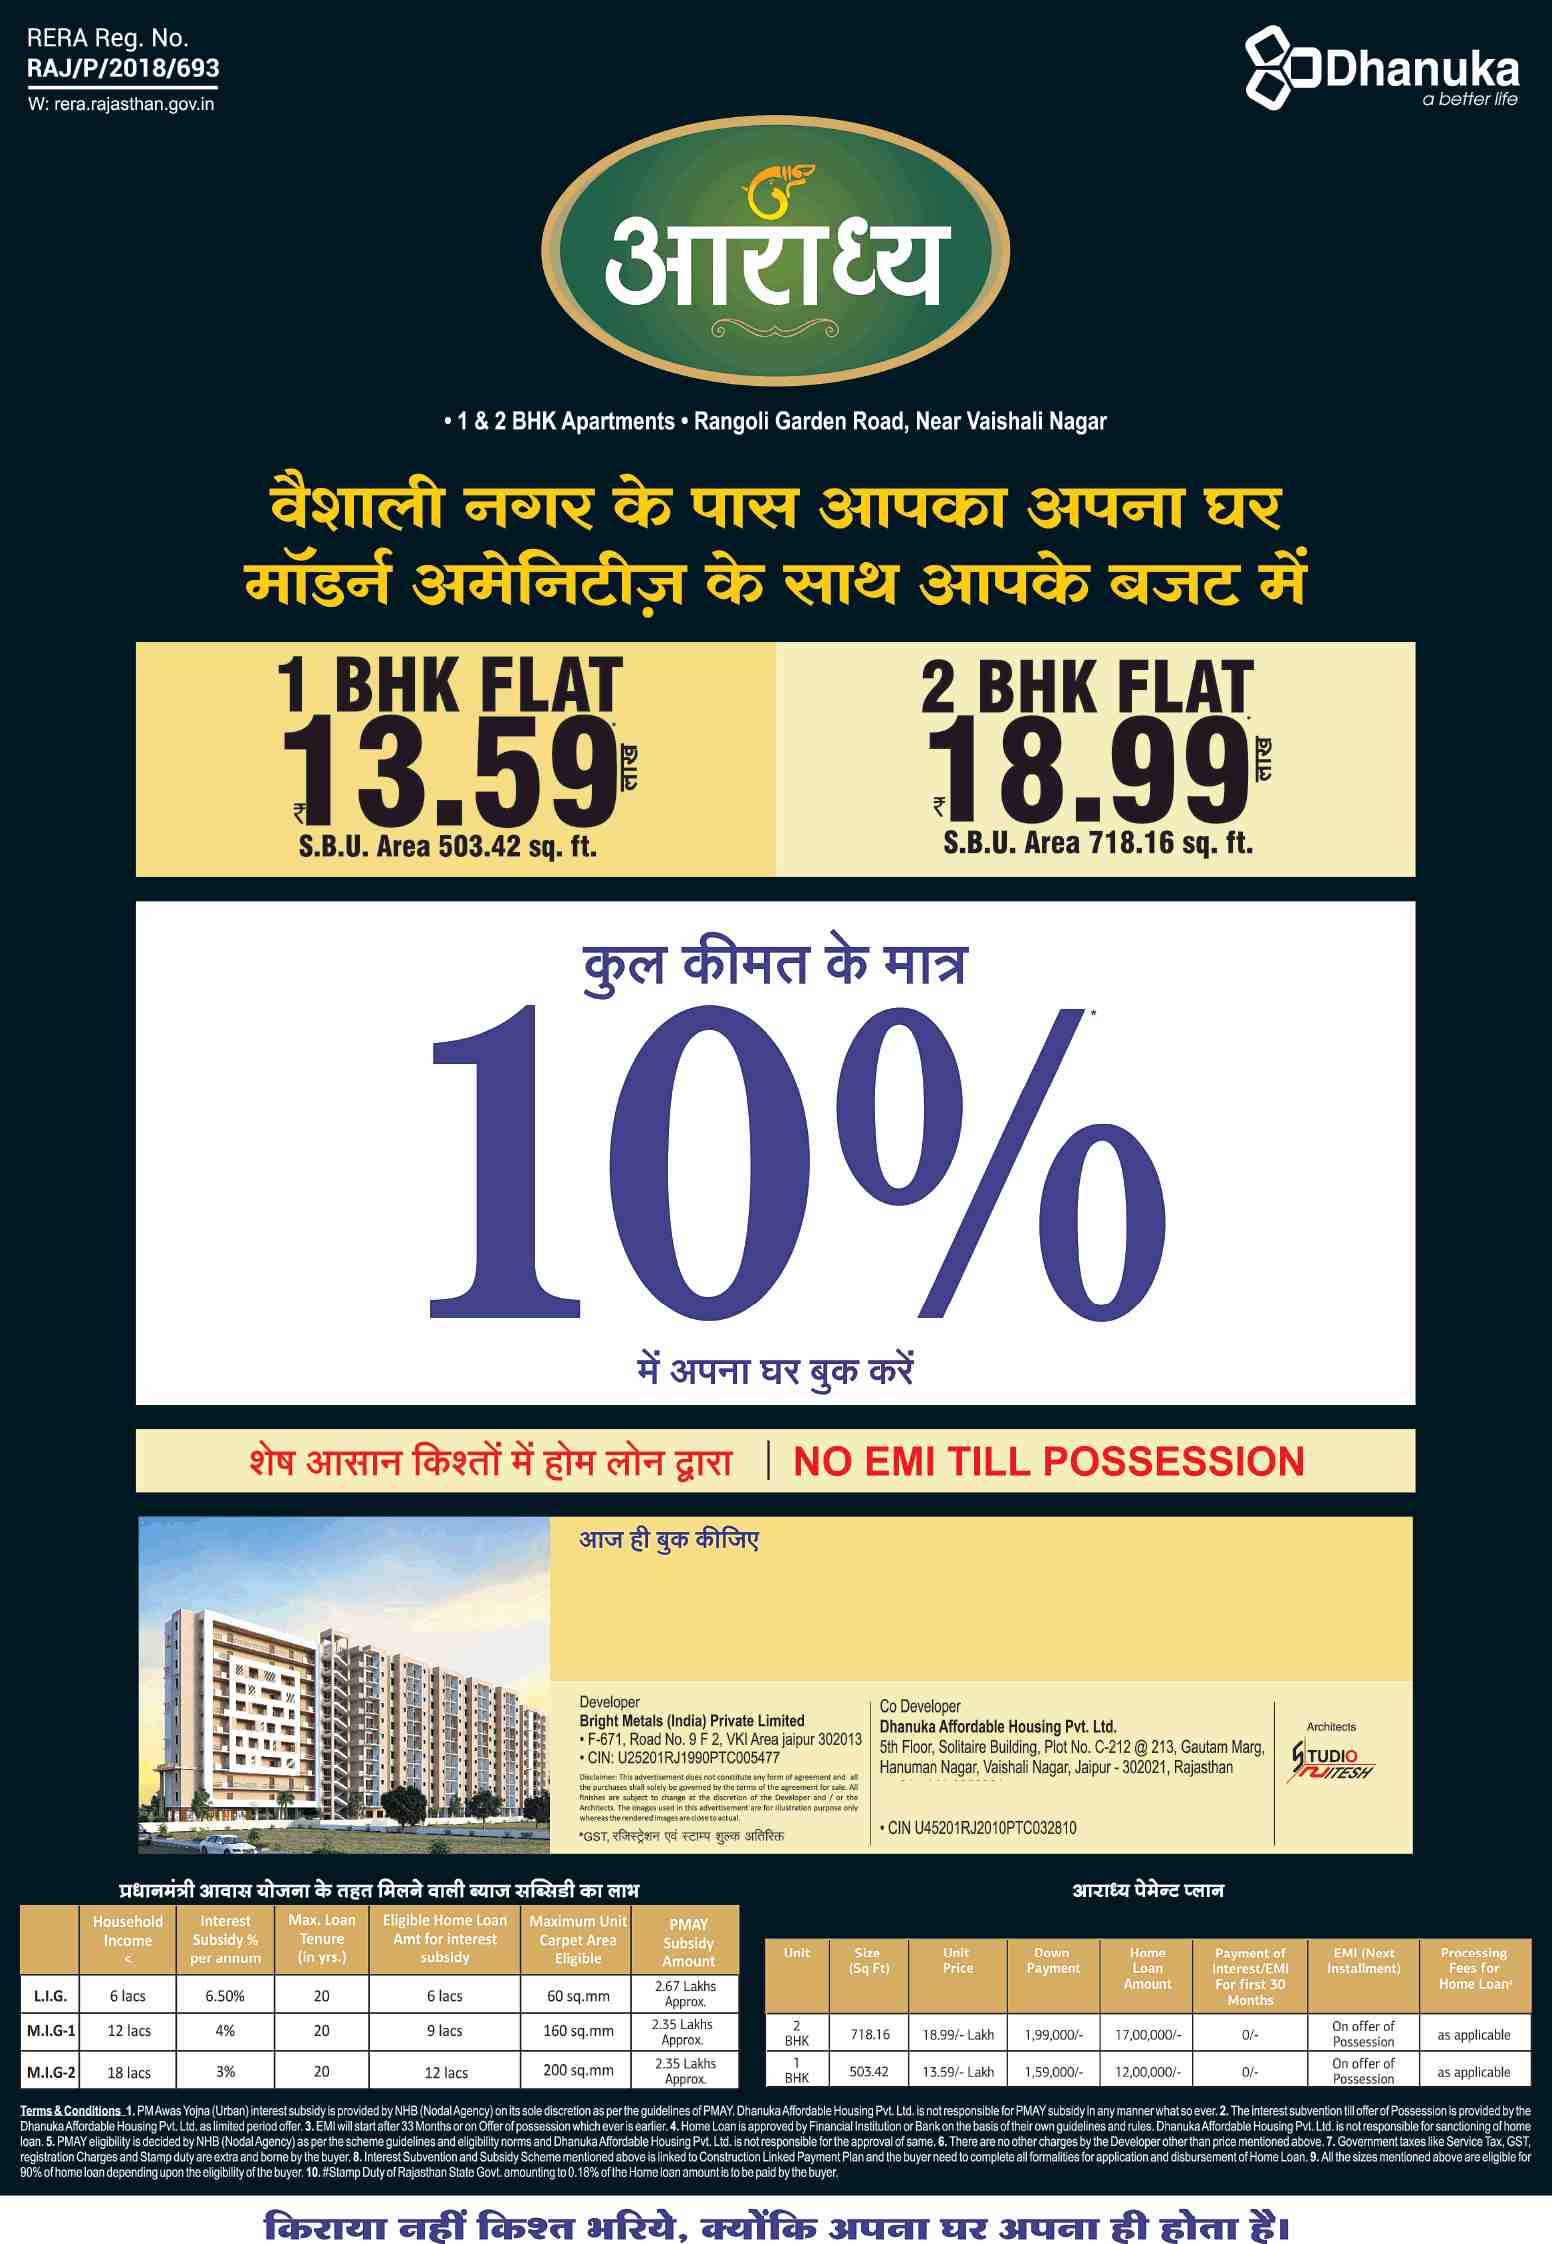 Pay 10% and book your home at Dhanuka Araddhya in Jaipur Update